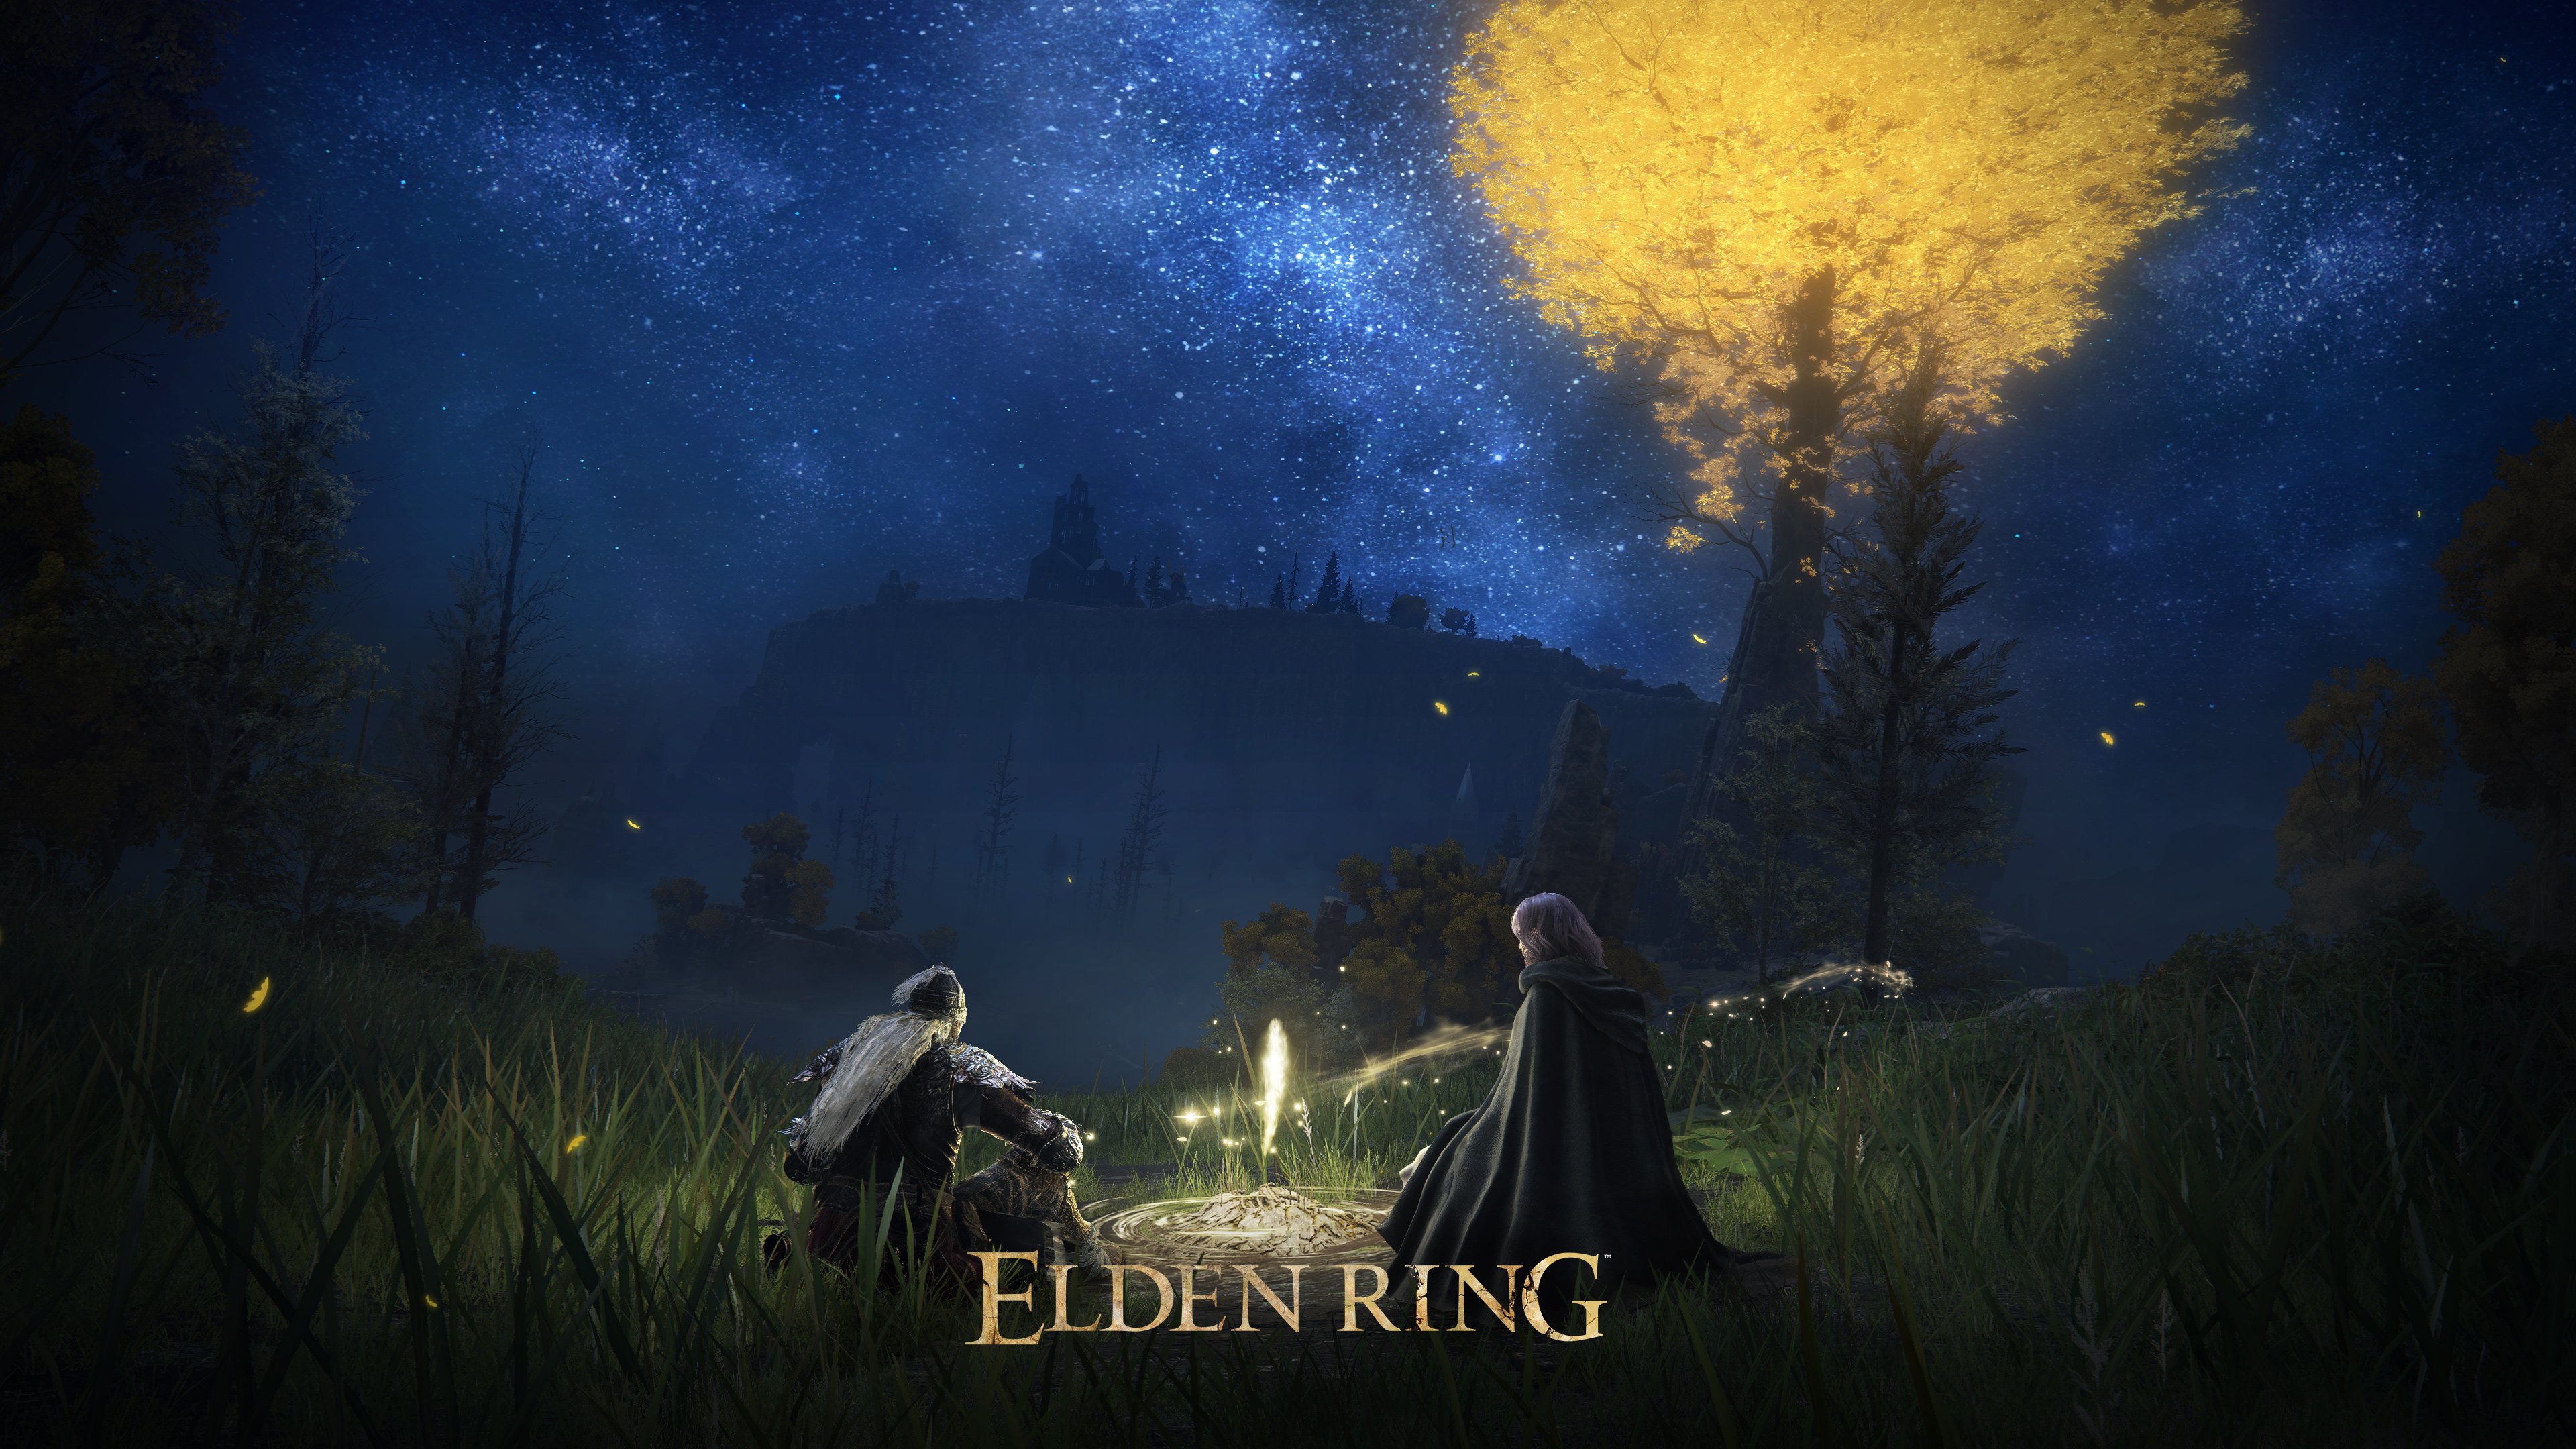 Mordecai's today's new Elden Ring screenshot in 4K! As a reminder, you can summon Melina at Sites of Lost Grace to level up!